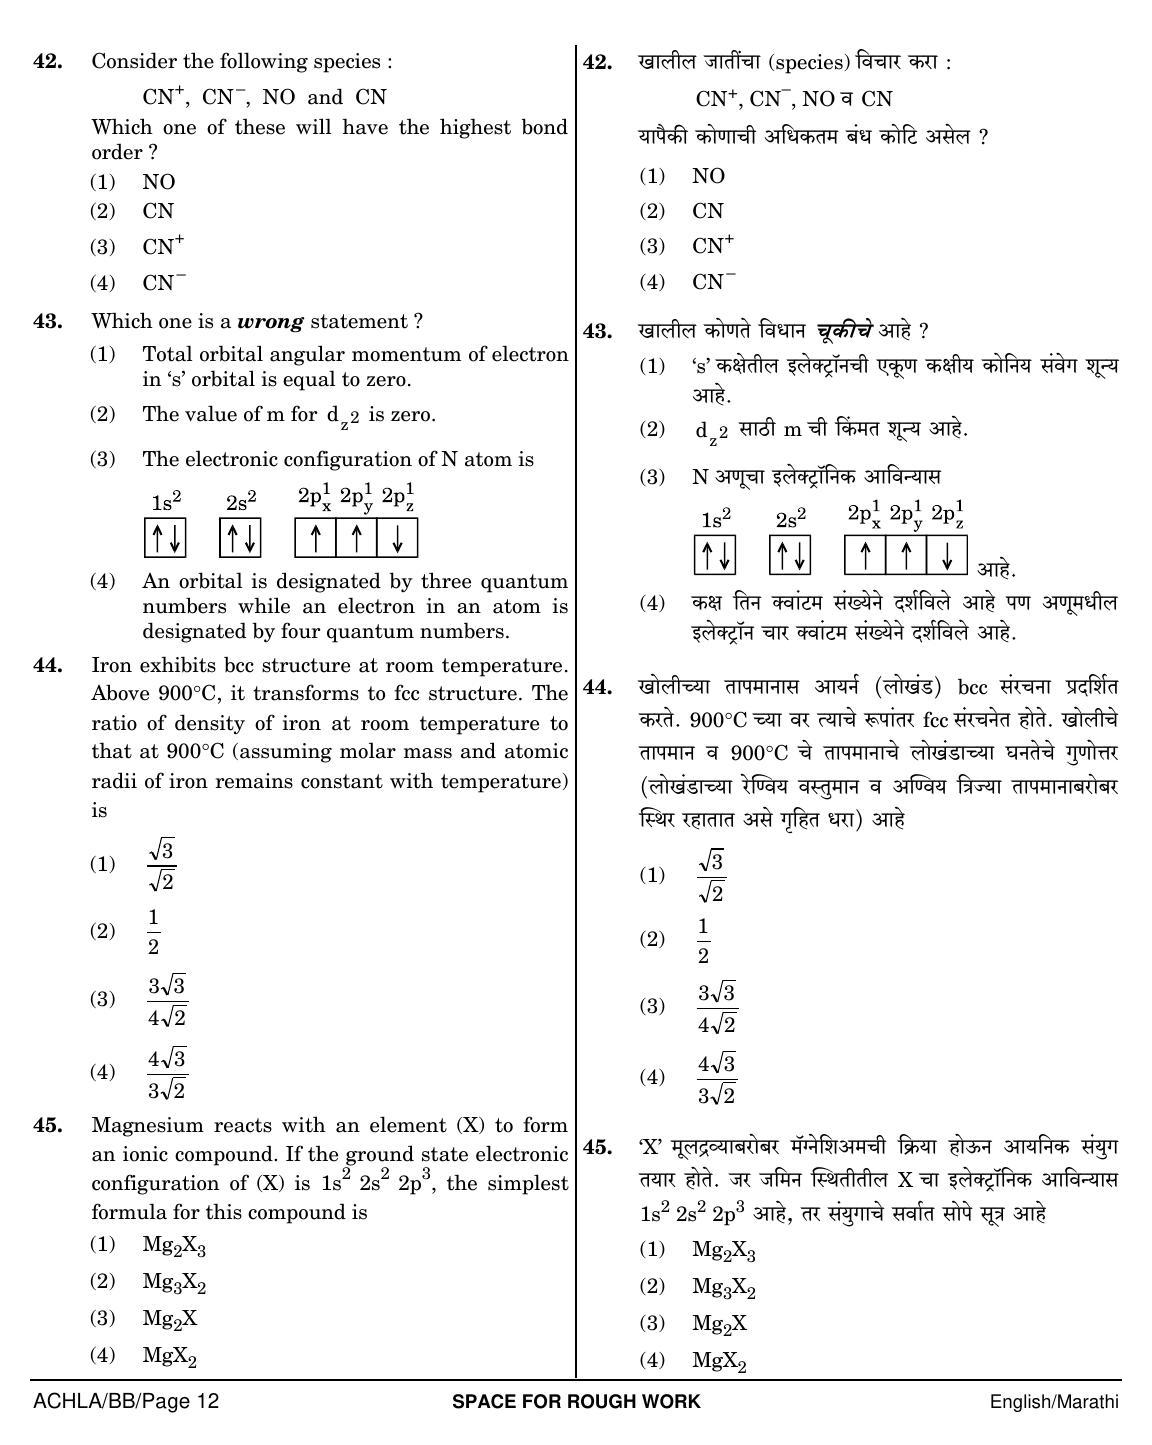 NEET Marathi BB 2018 Question Paper - Page 12